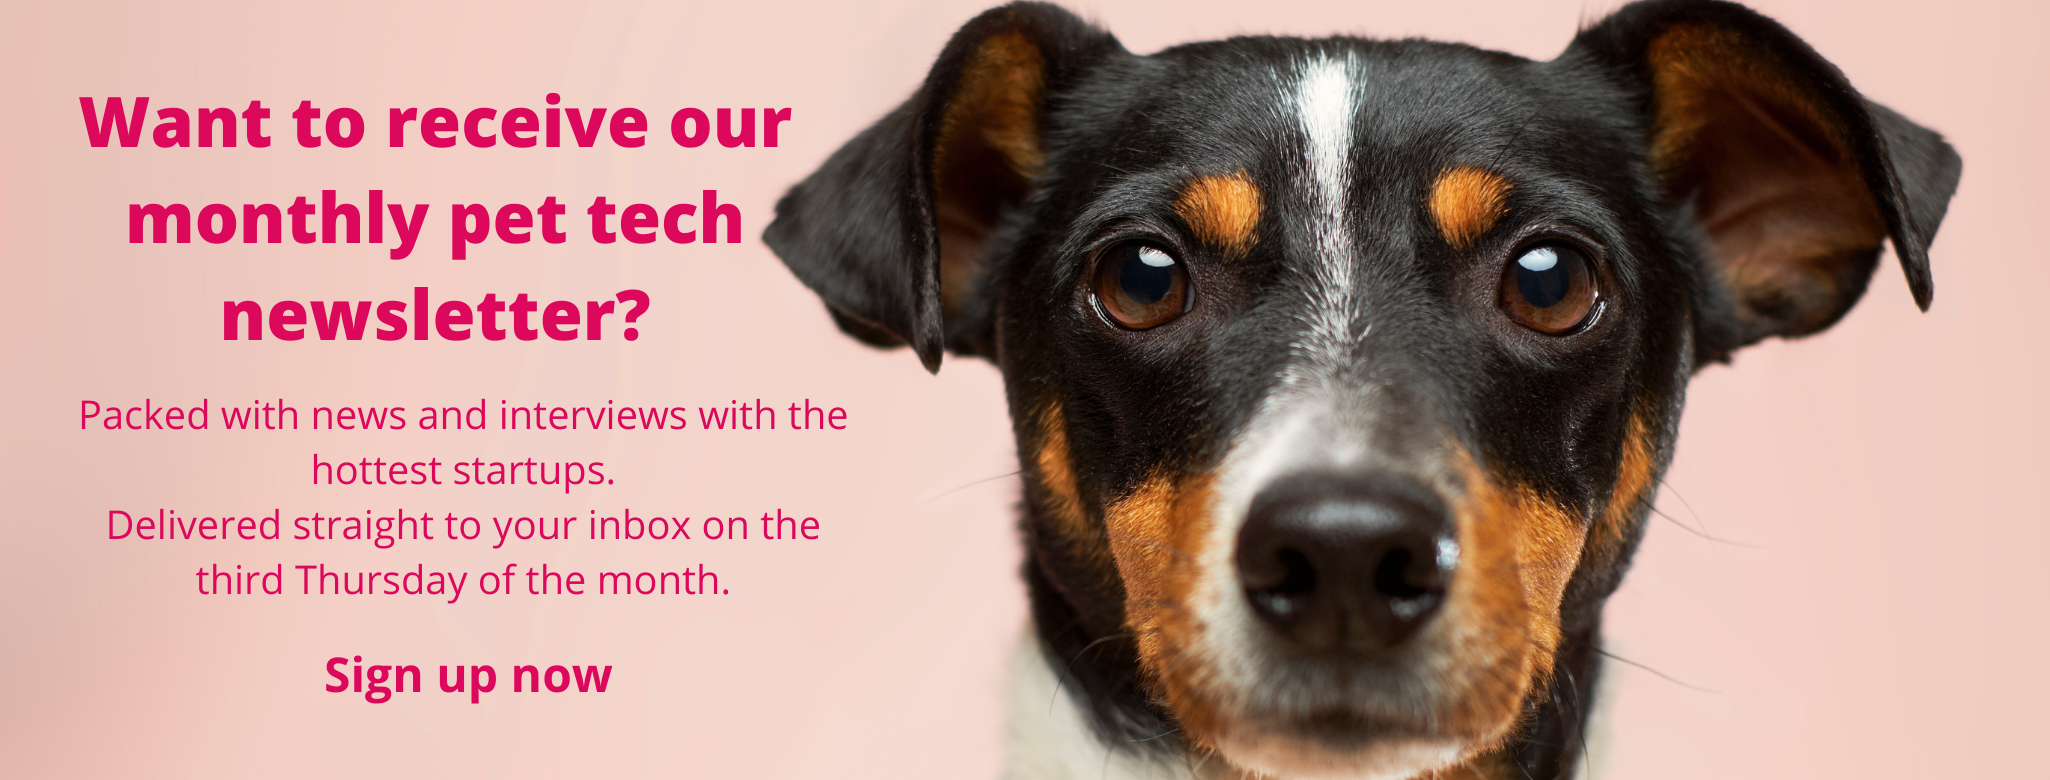 Sign up for the Sifted pet tech newsletter